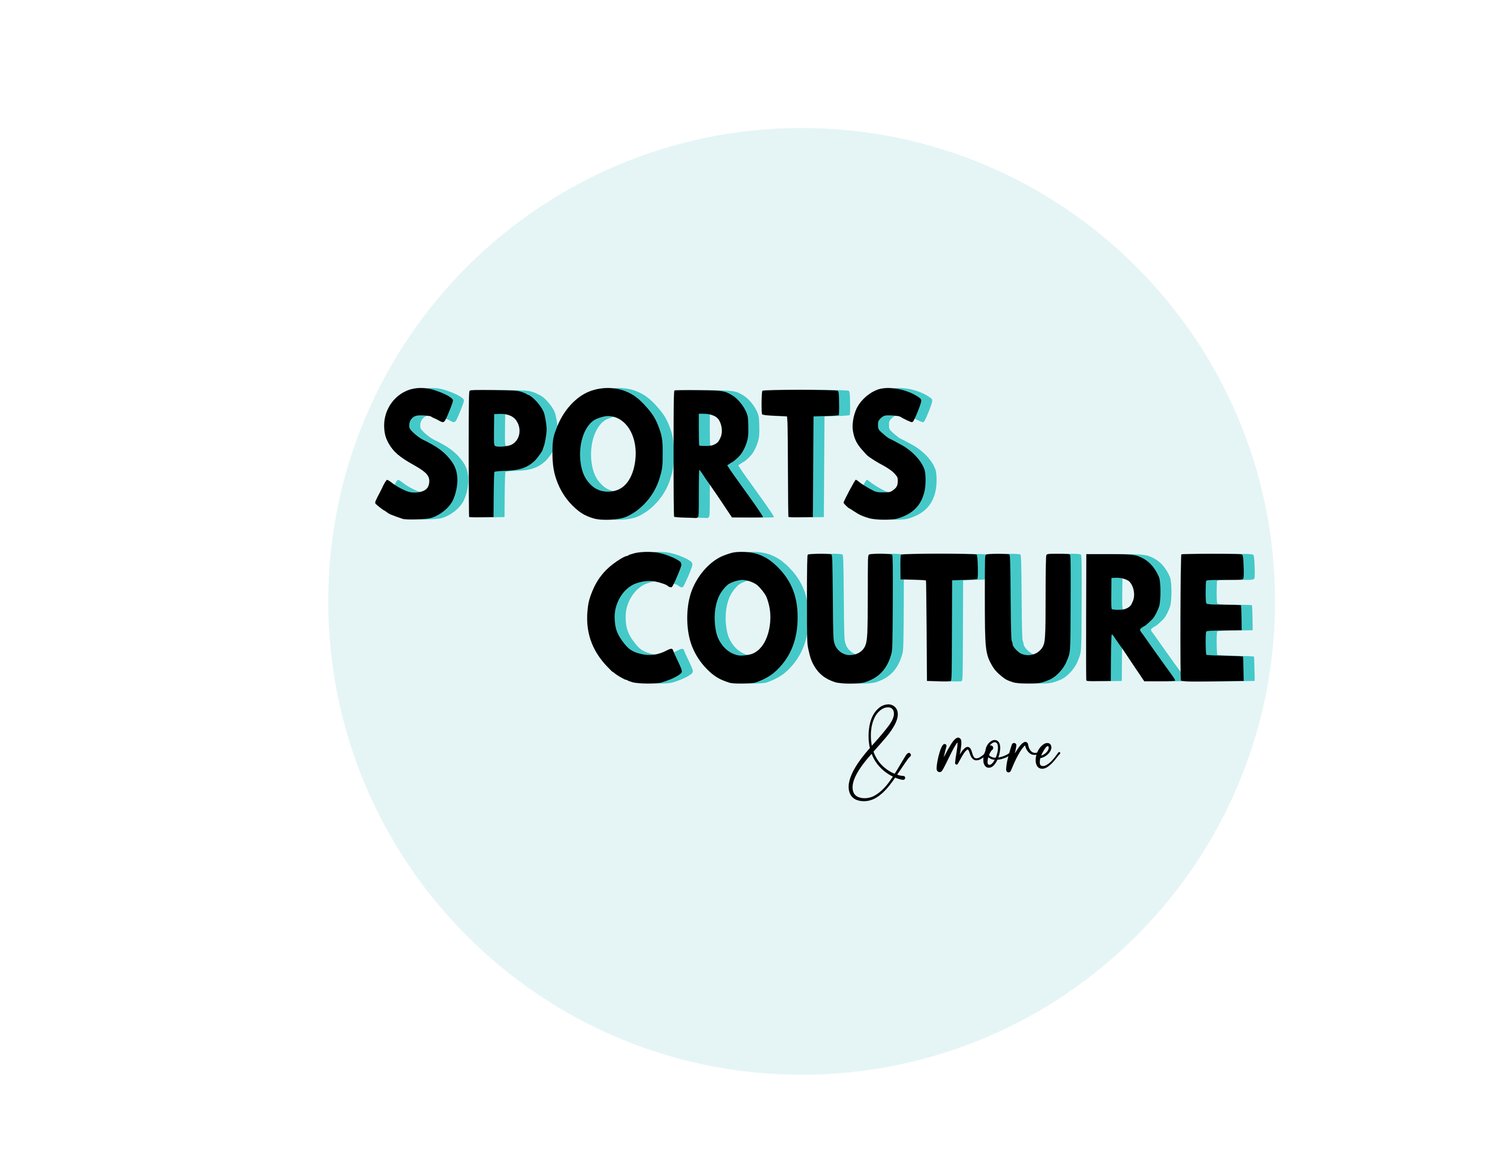 Sports Couture